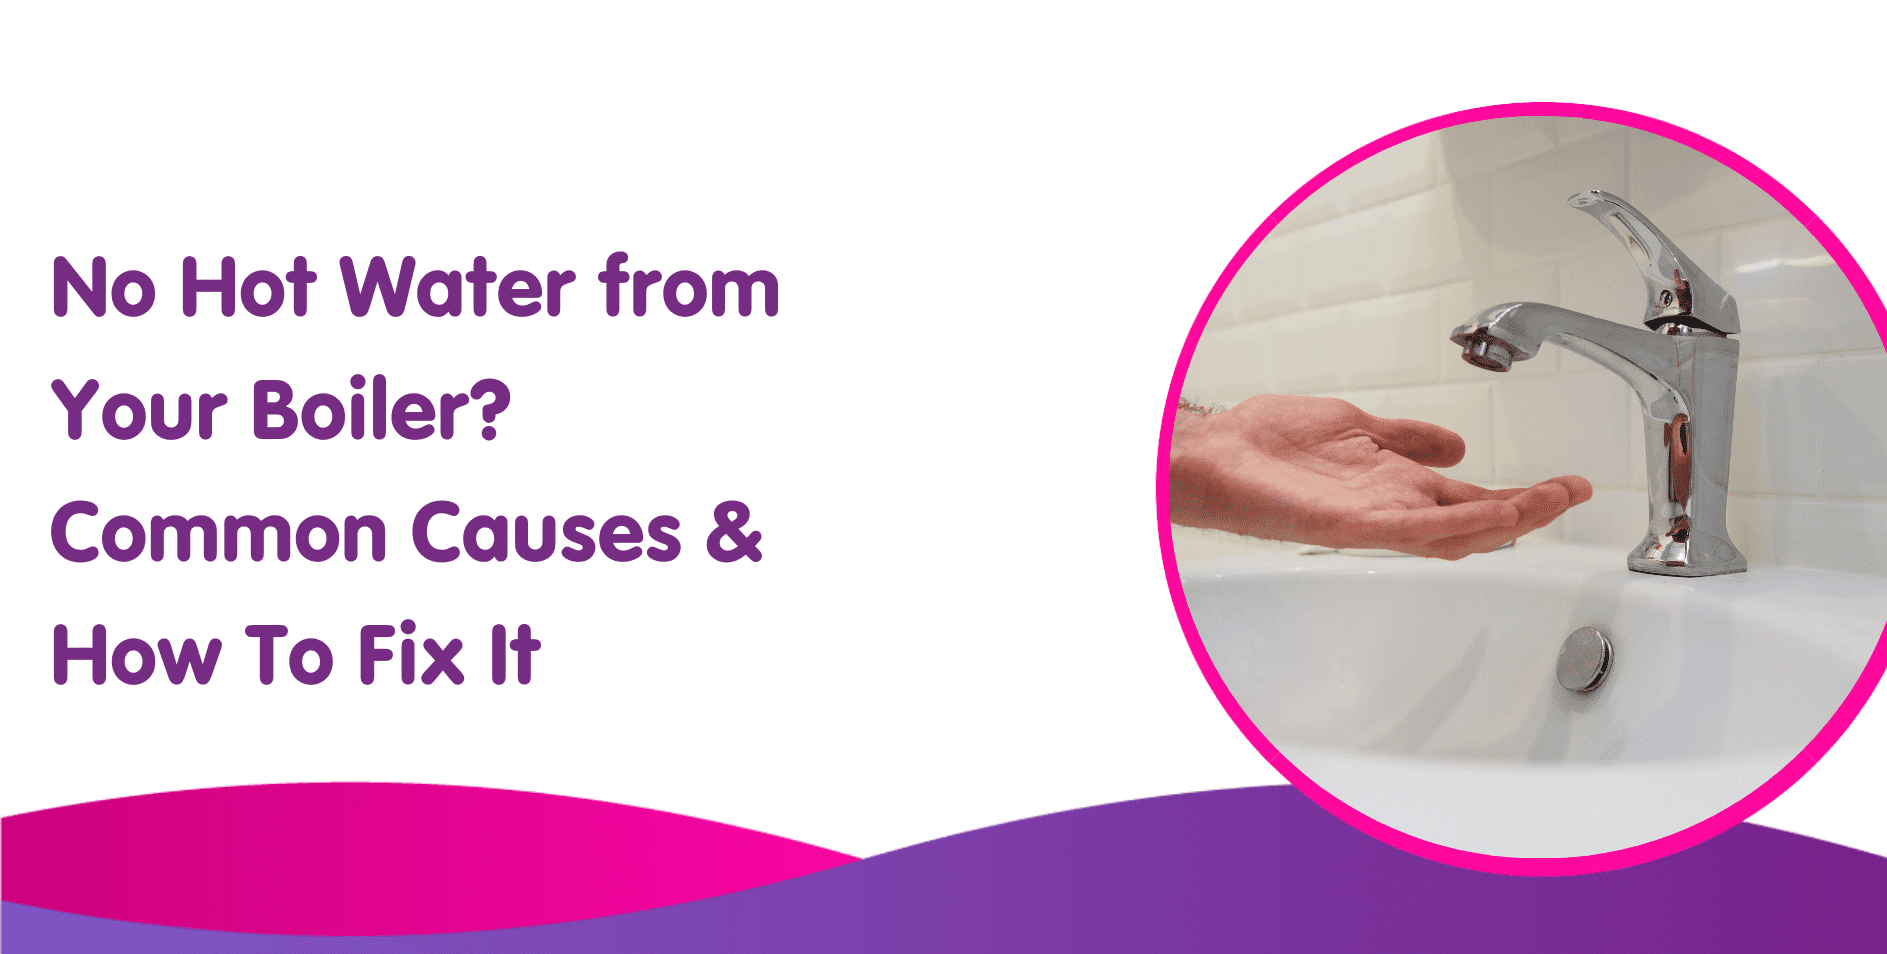 No Hot Water from Your Boiler - Common Causes & How to Fix it